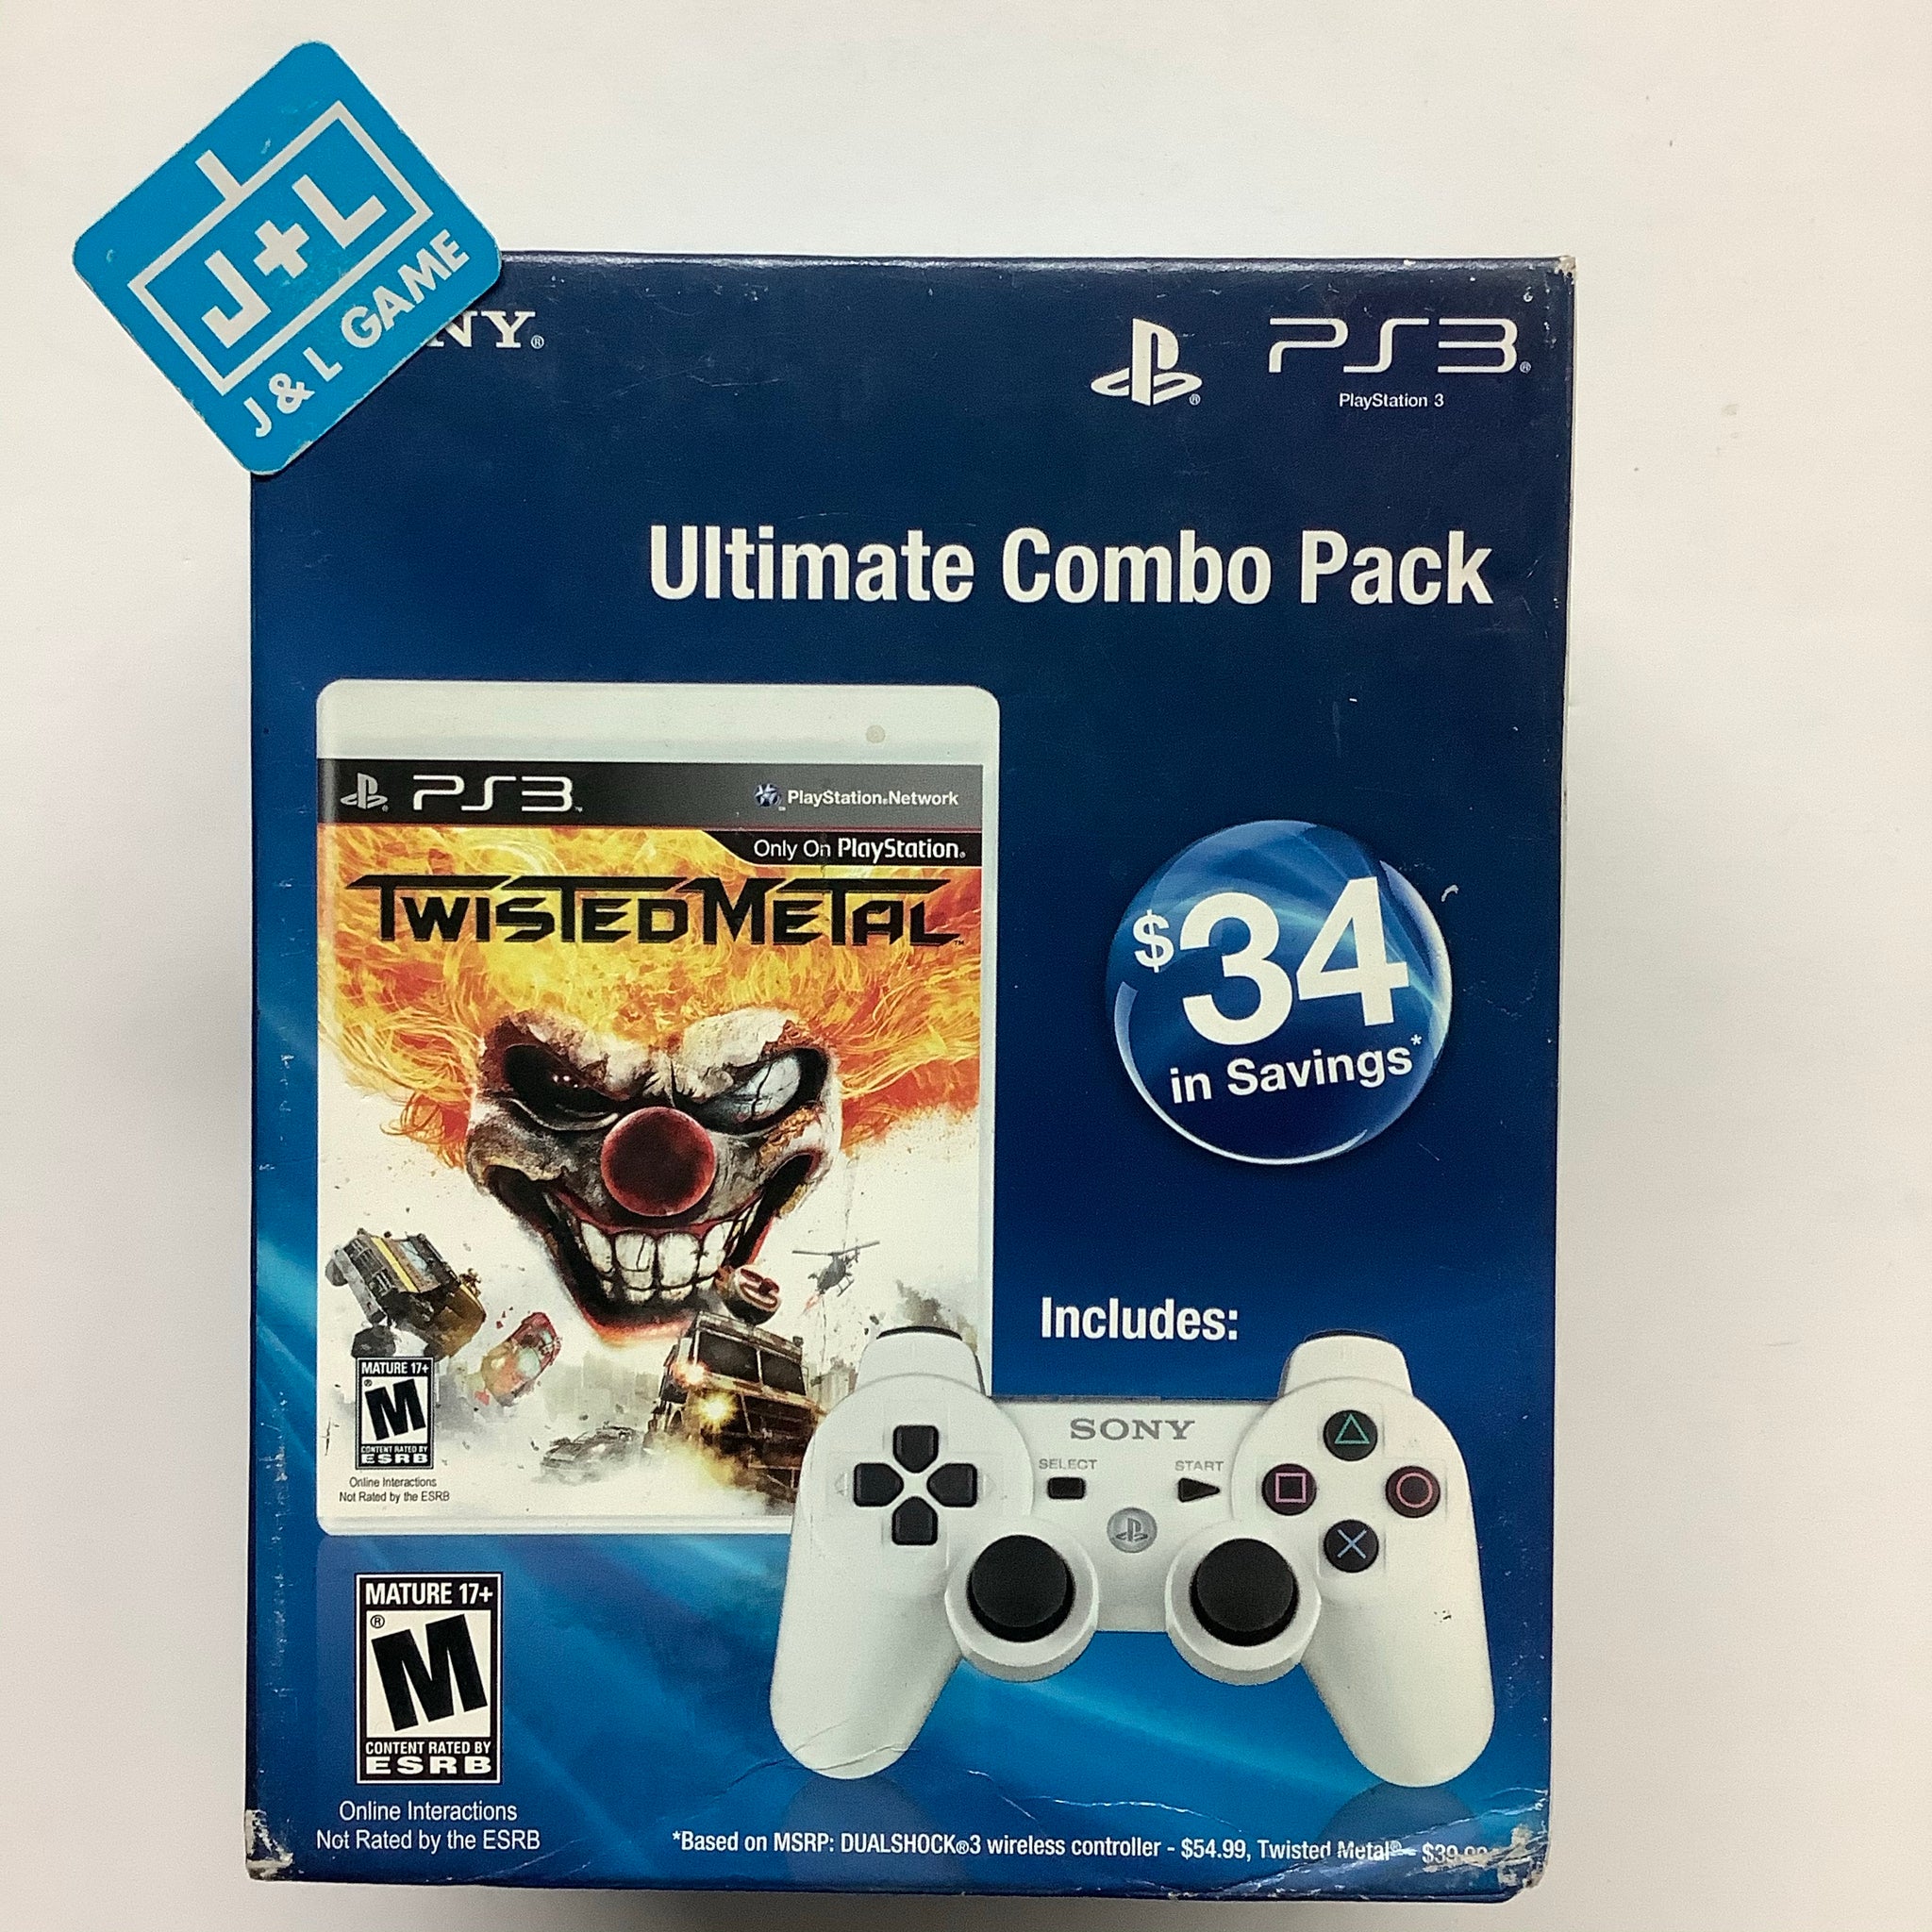 SONY Playstation 3 Twisted Metal & DUALSHOCK3 Wireless Controller - (PS3) Playstation 3 (Ultimate Combo Pack) Video Games PlayStation   